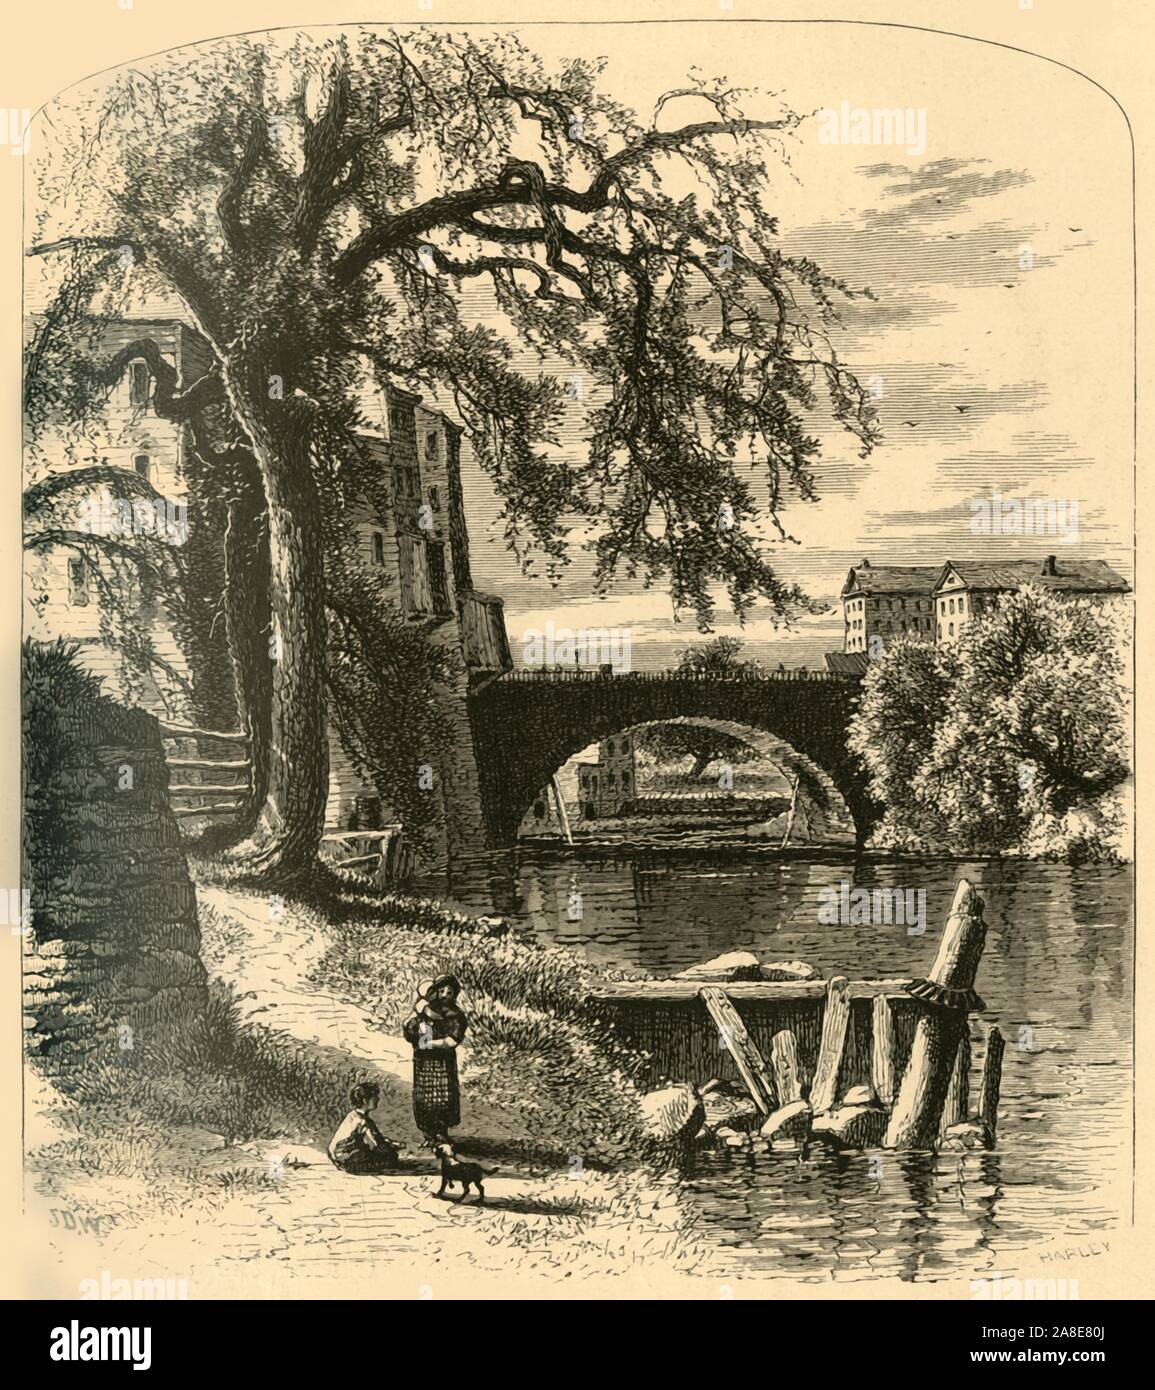 'Main-Street Bridge, Hartford', 1874. Stone Bridge over the Park River, Hartford, Connecticut, USA. The bridge was built in 1833. From &quot;Picturesque America; or, The Land We Live In, A Delineation by Pen and Pencil of the Mountains, Rivers, Lakes...with Illustrations on Steel and Wood by Eminent American Artists&quot; Vol. II, edited by William Cullen Bryant. [D. Appleton and Company, New York, 1874] Stock Photo